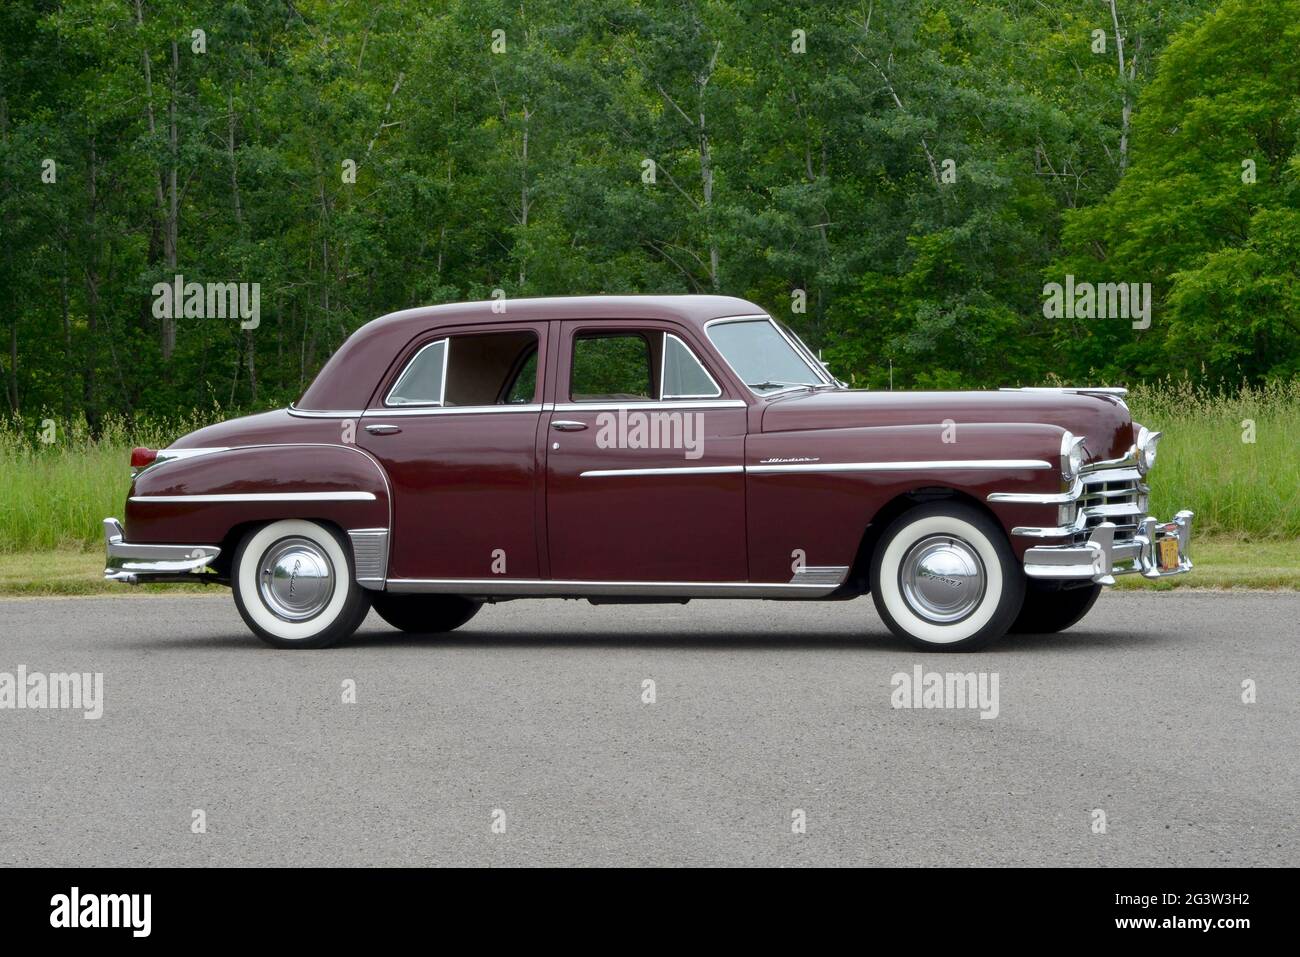 A side view of a 1949 Chrysler Windsor four-door sedan before a wooded background in soft light. Stock Photo